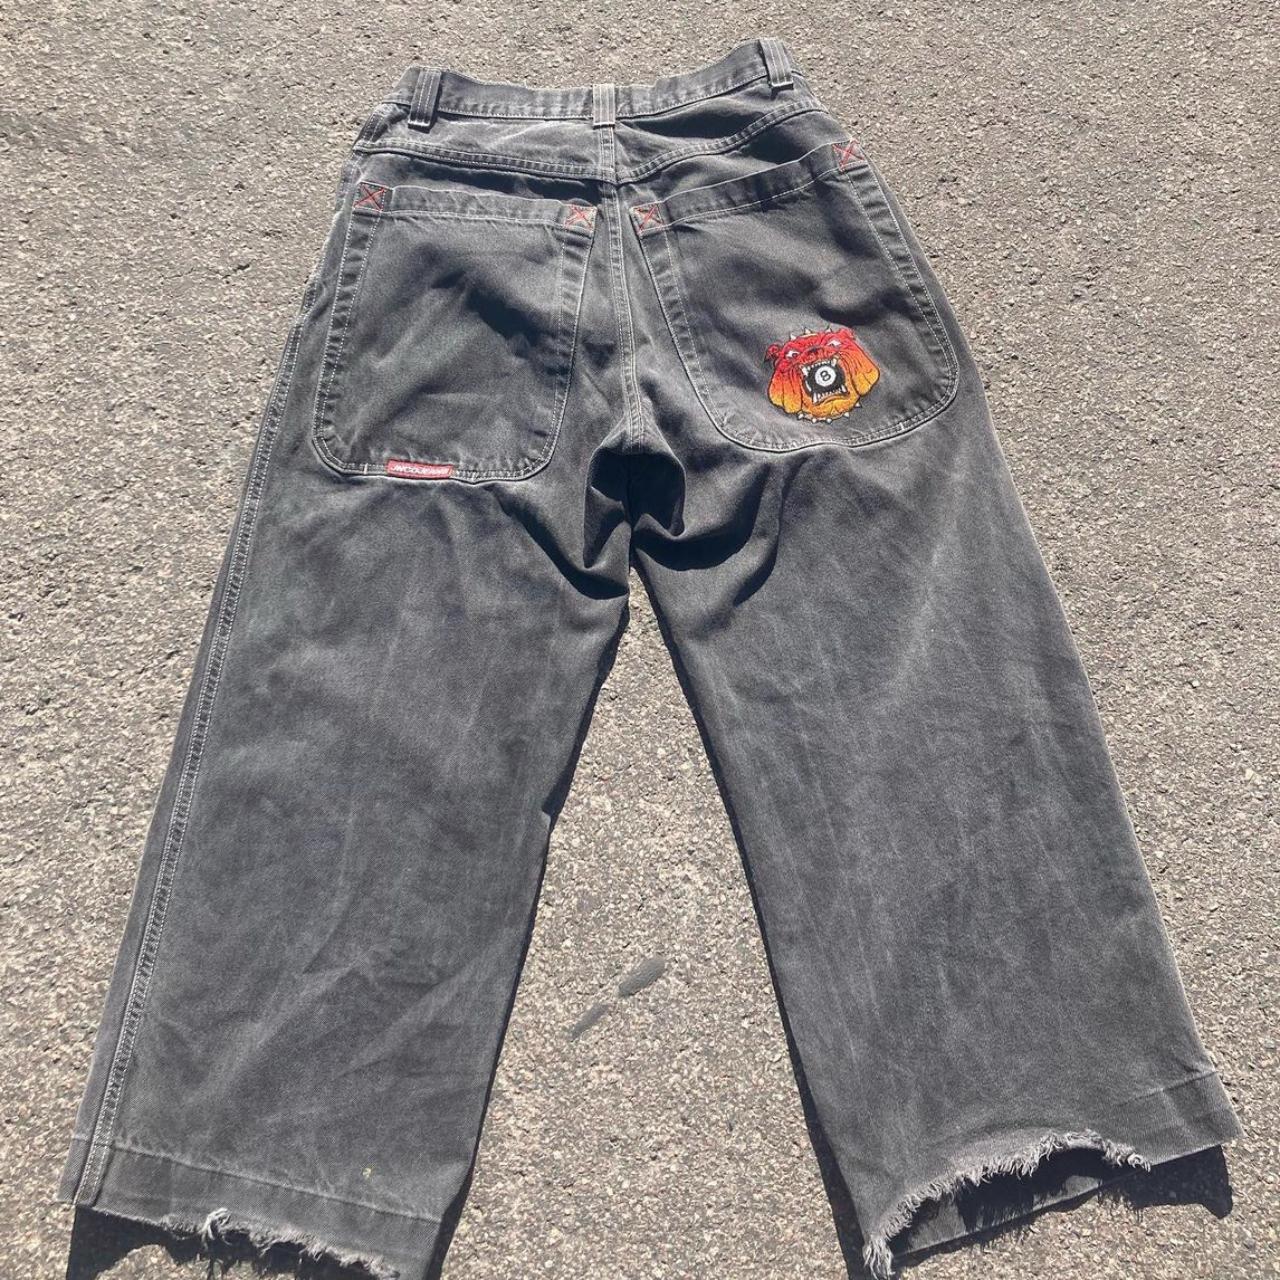 Vintage Jnco Bulldogs 90s Jnco Jeans DM with... - Depop